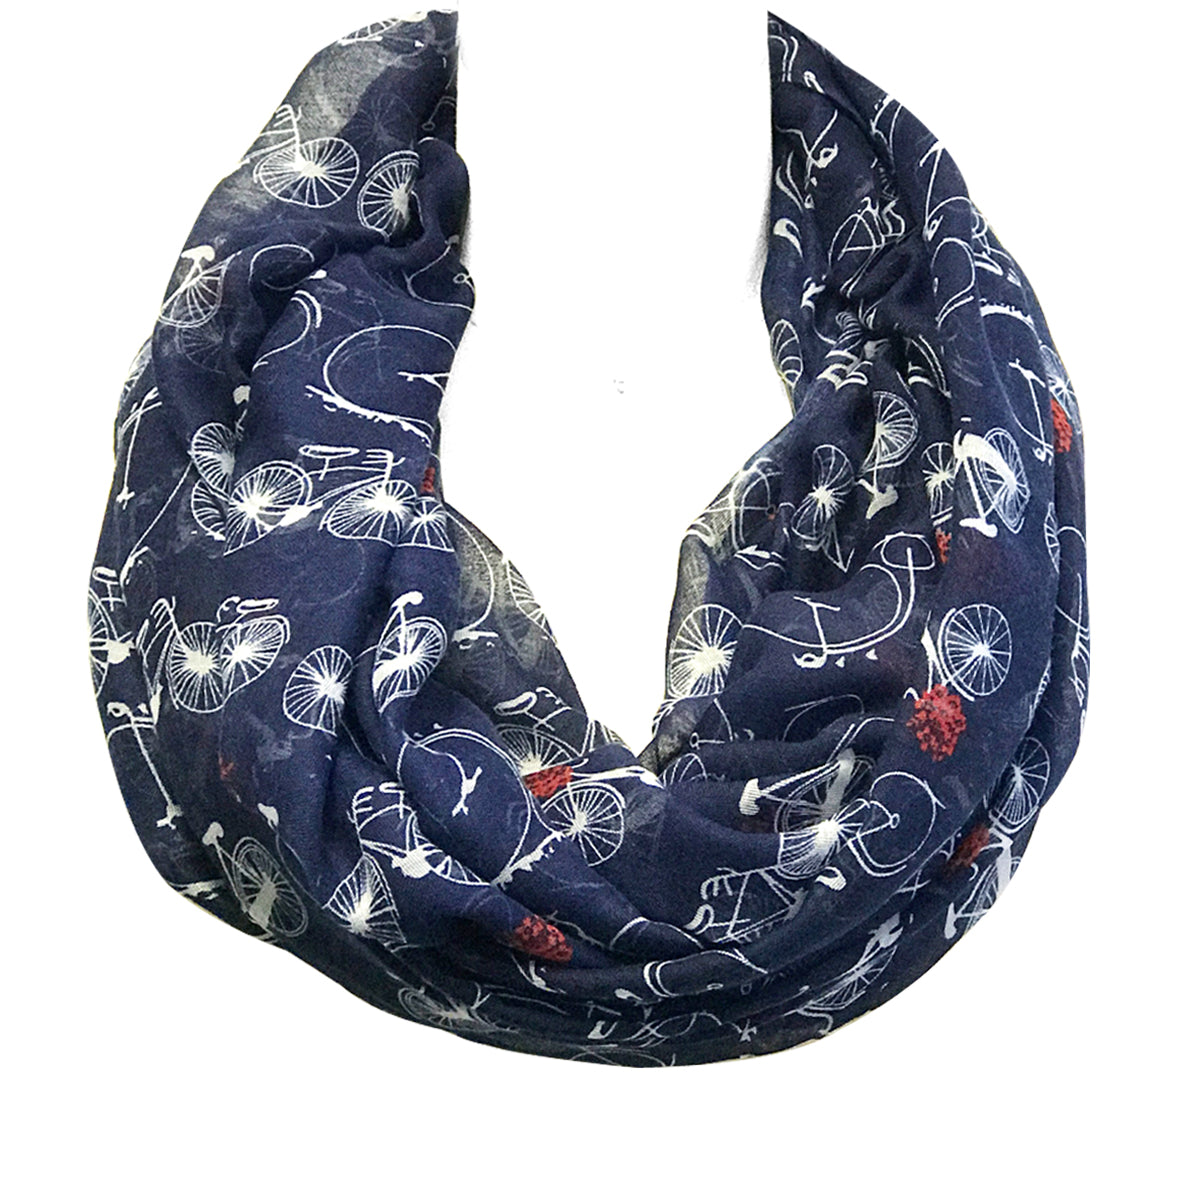 Wrapables Lightweight Vintage Bicycle Infinity Scarf